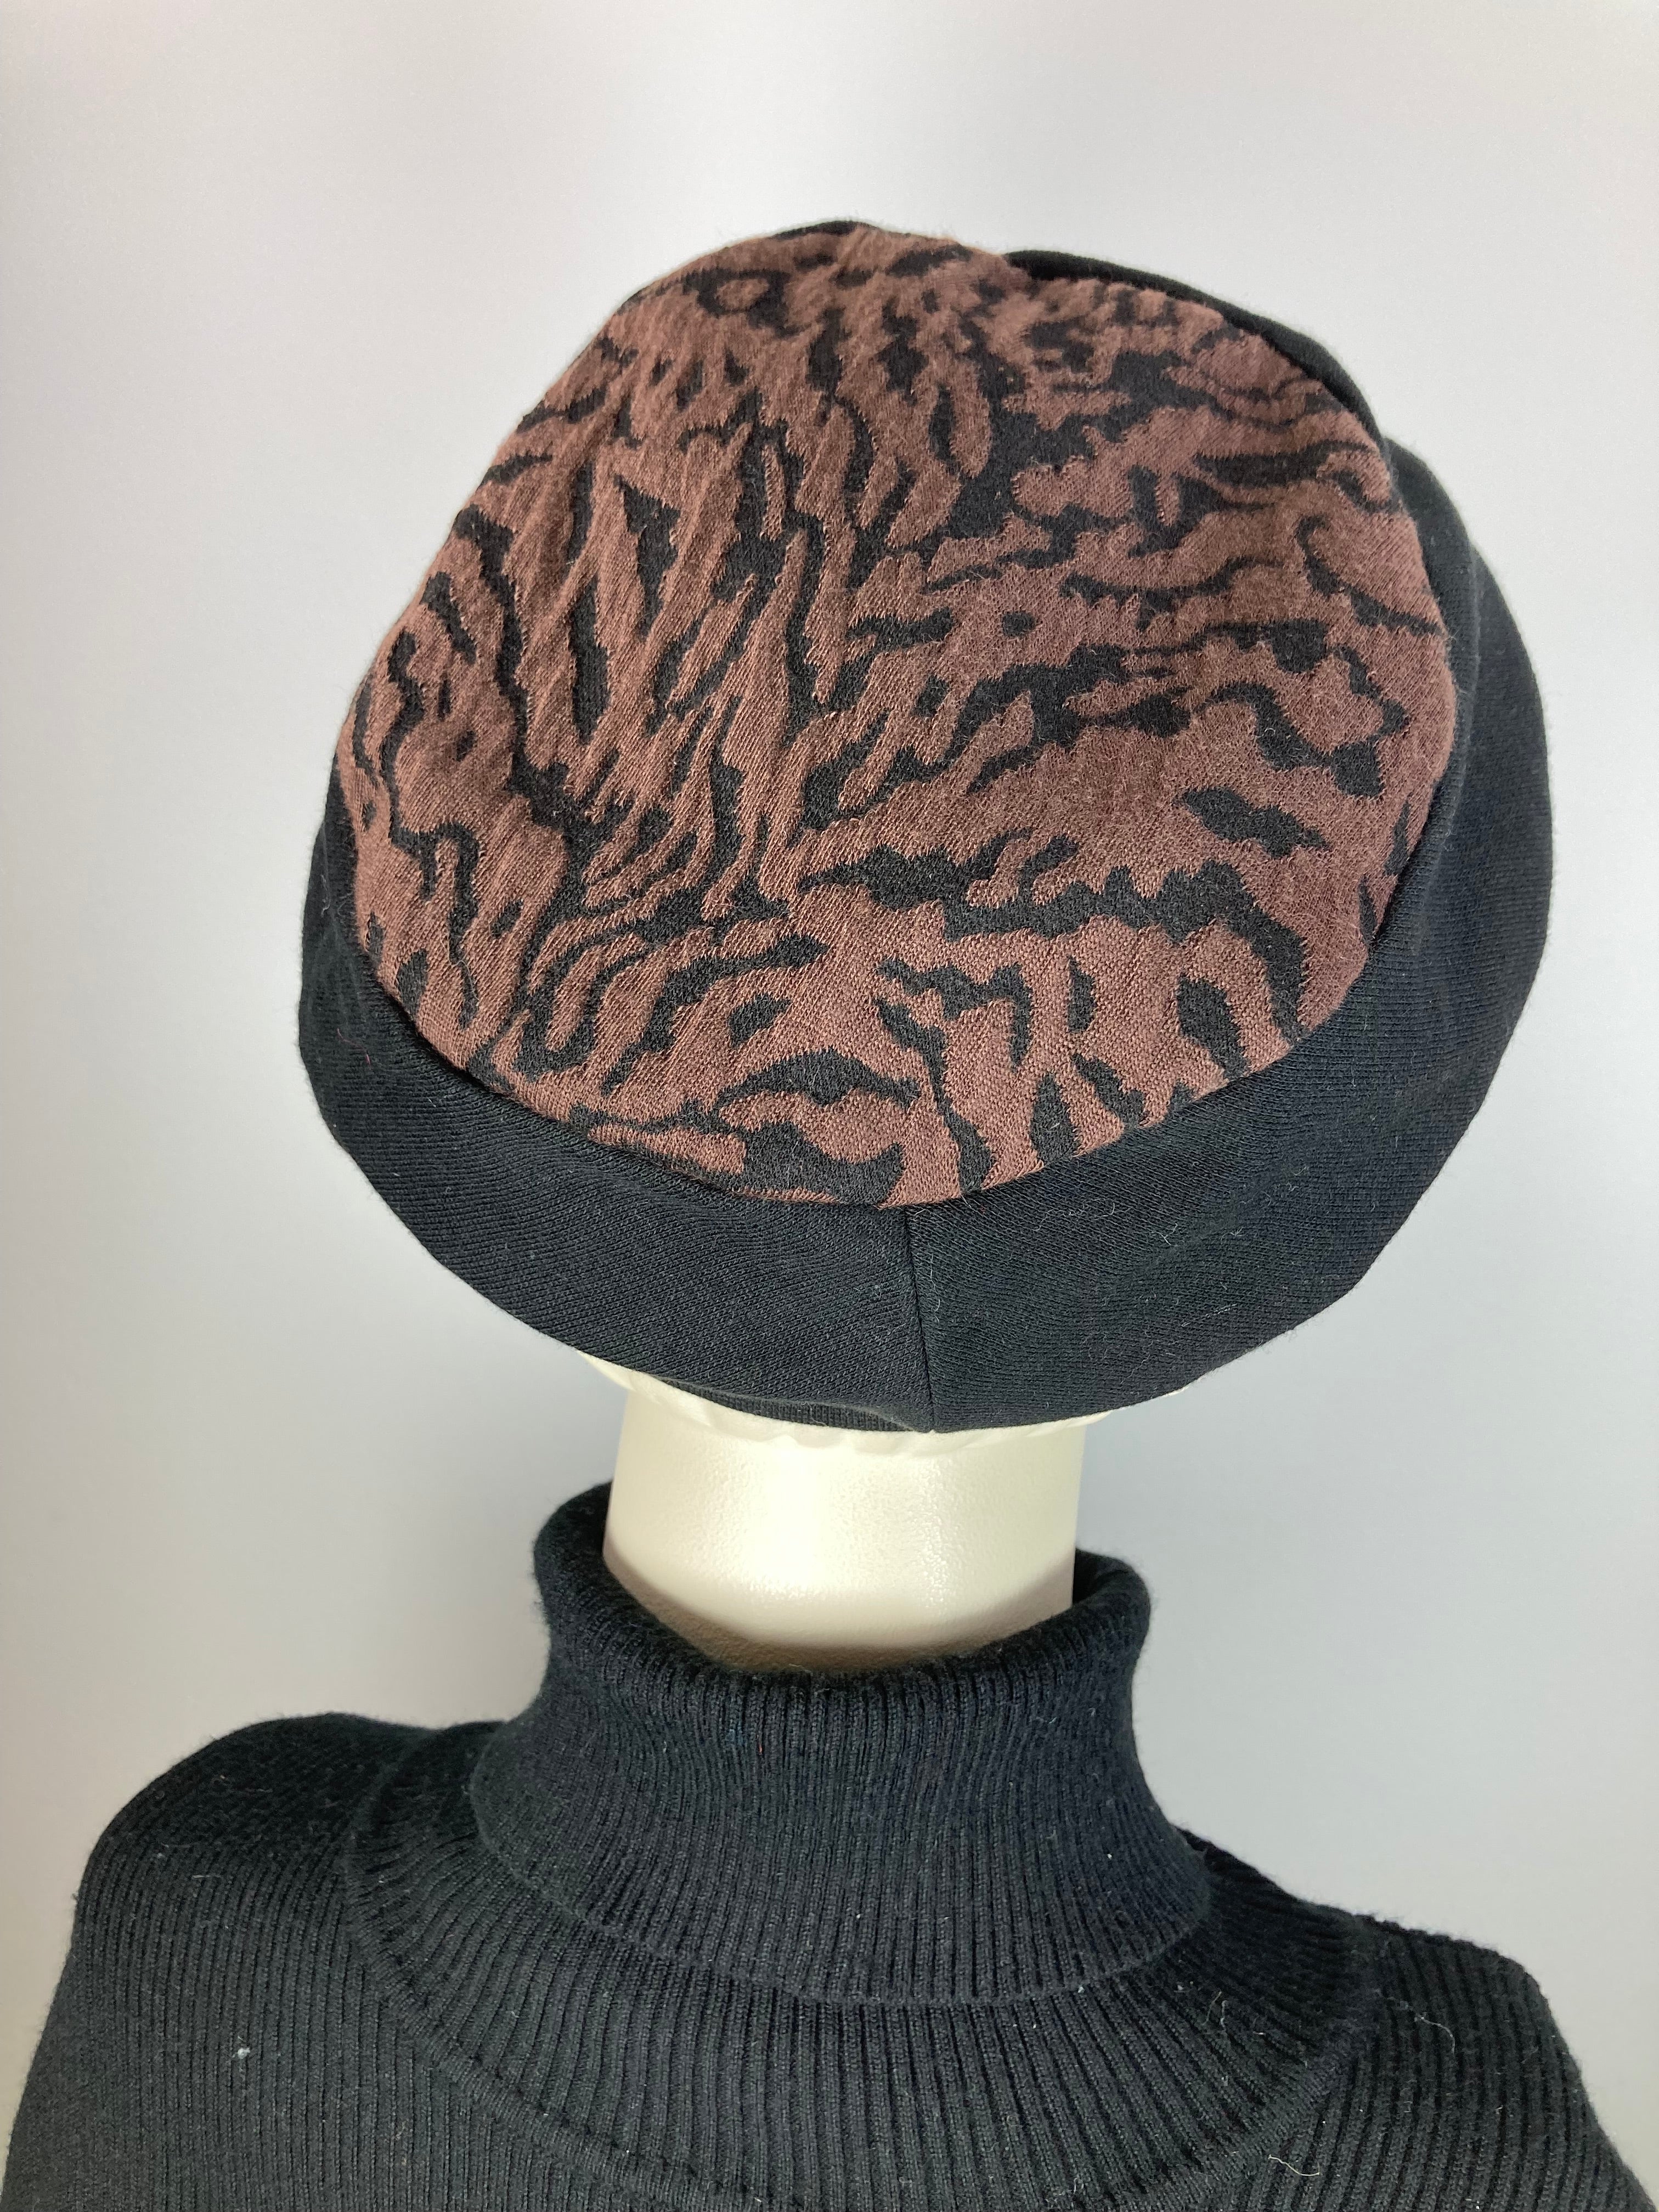 Womens Slouchy Beret. Knit black brown Hat. Slouch Eco friendly Hat. Boho chic casual hat. Ladies comfy travel hat. Stylish fabric hat.